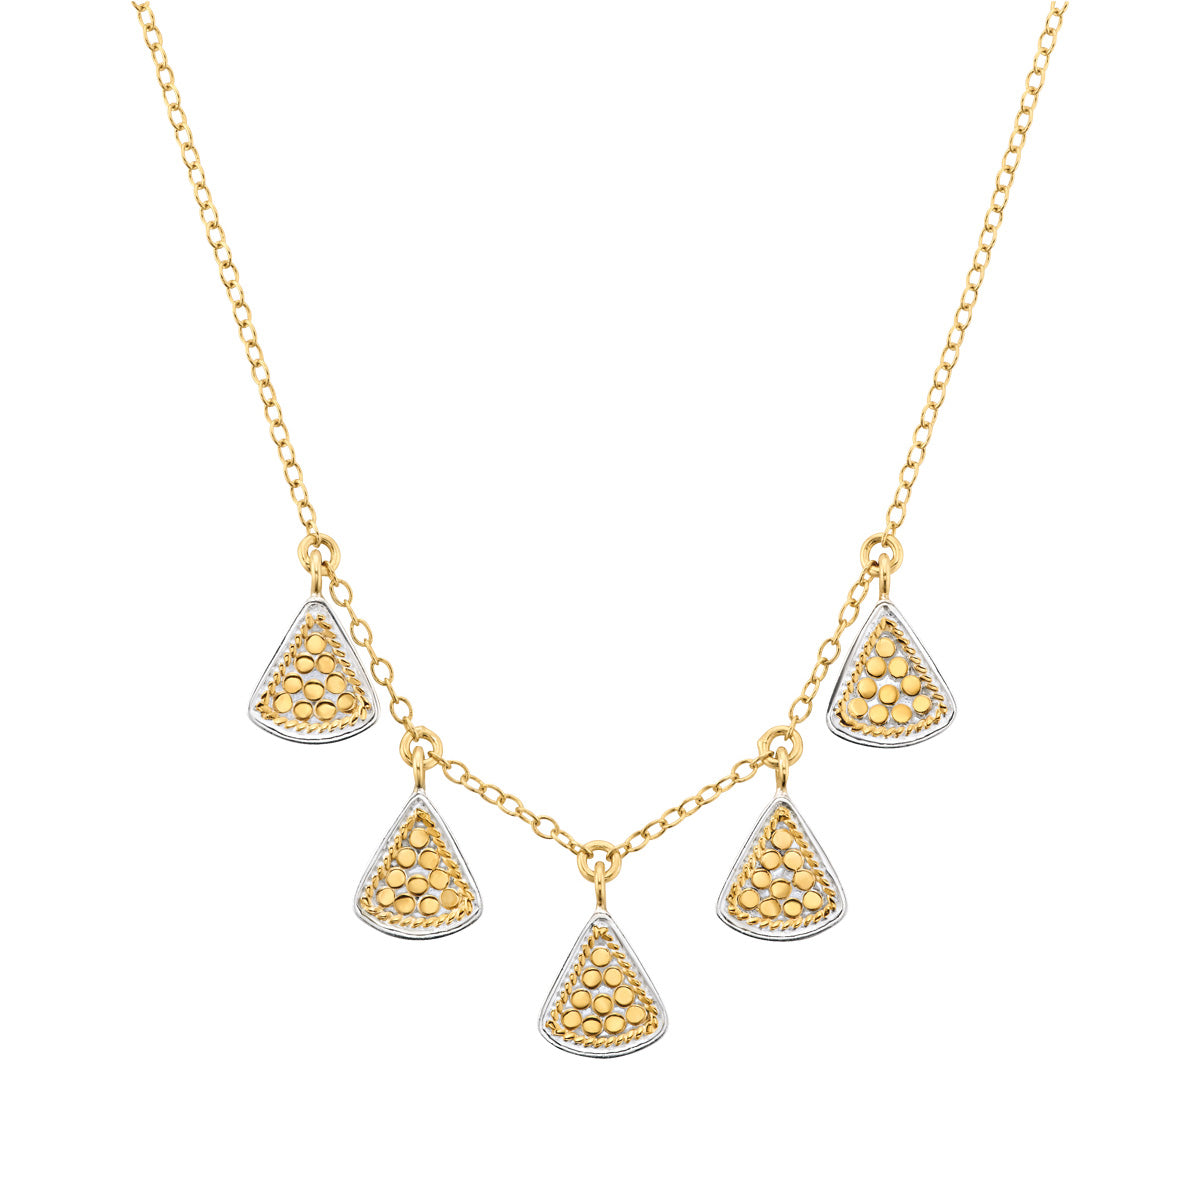 Ana Beck 18k gold plated and sterling silver Triangle Charm Necklace - Gold